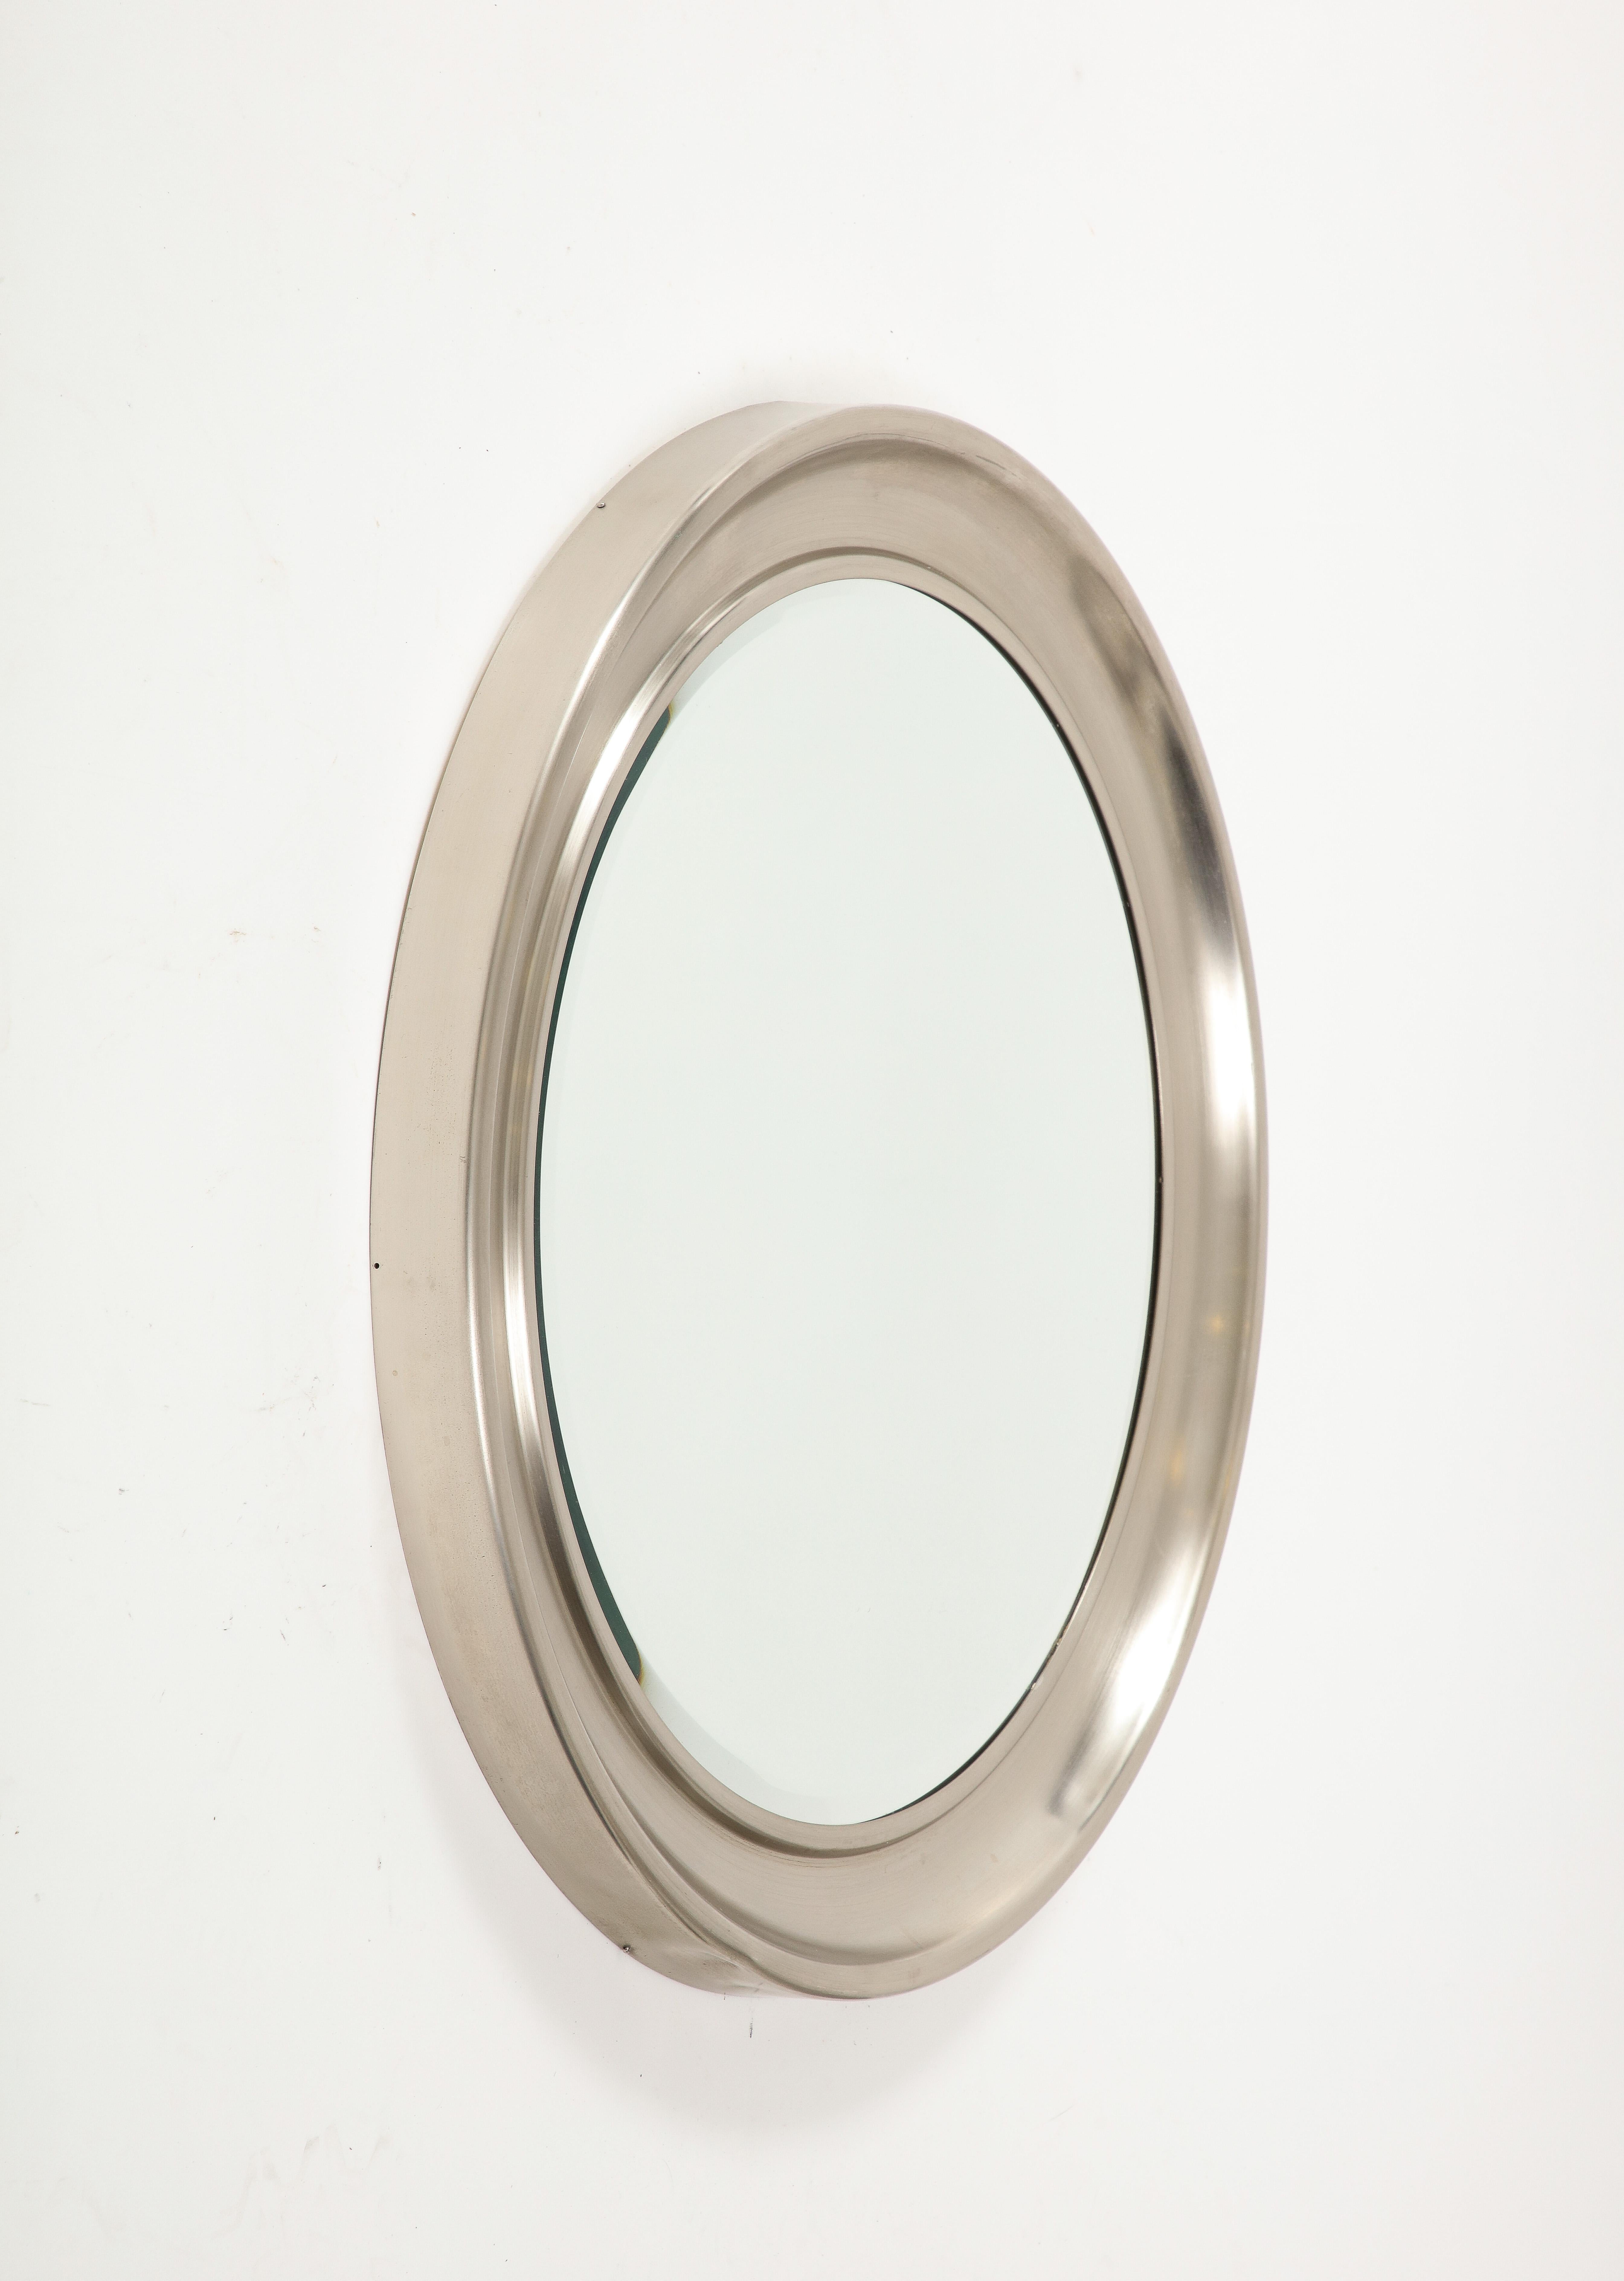 Stamped, Aluminum Mirror with Bevelled Glass by Sergio Mazza for Artemide, 1970. Italian Milanese Minimalism.